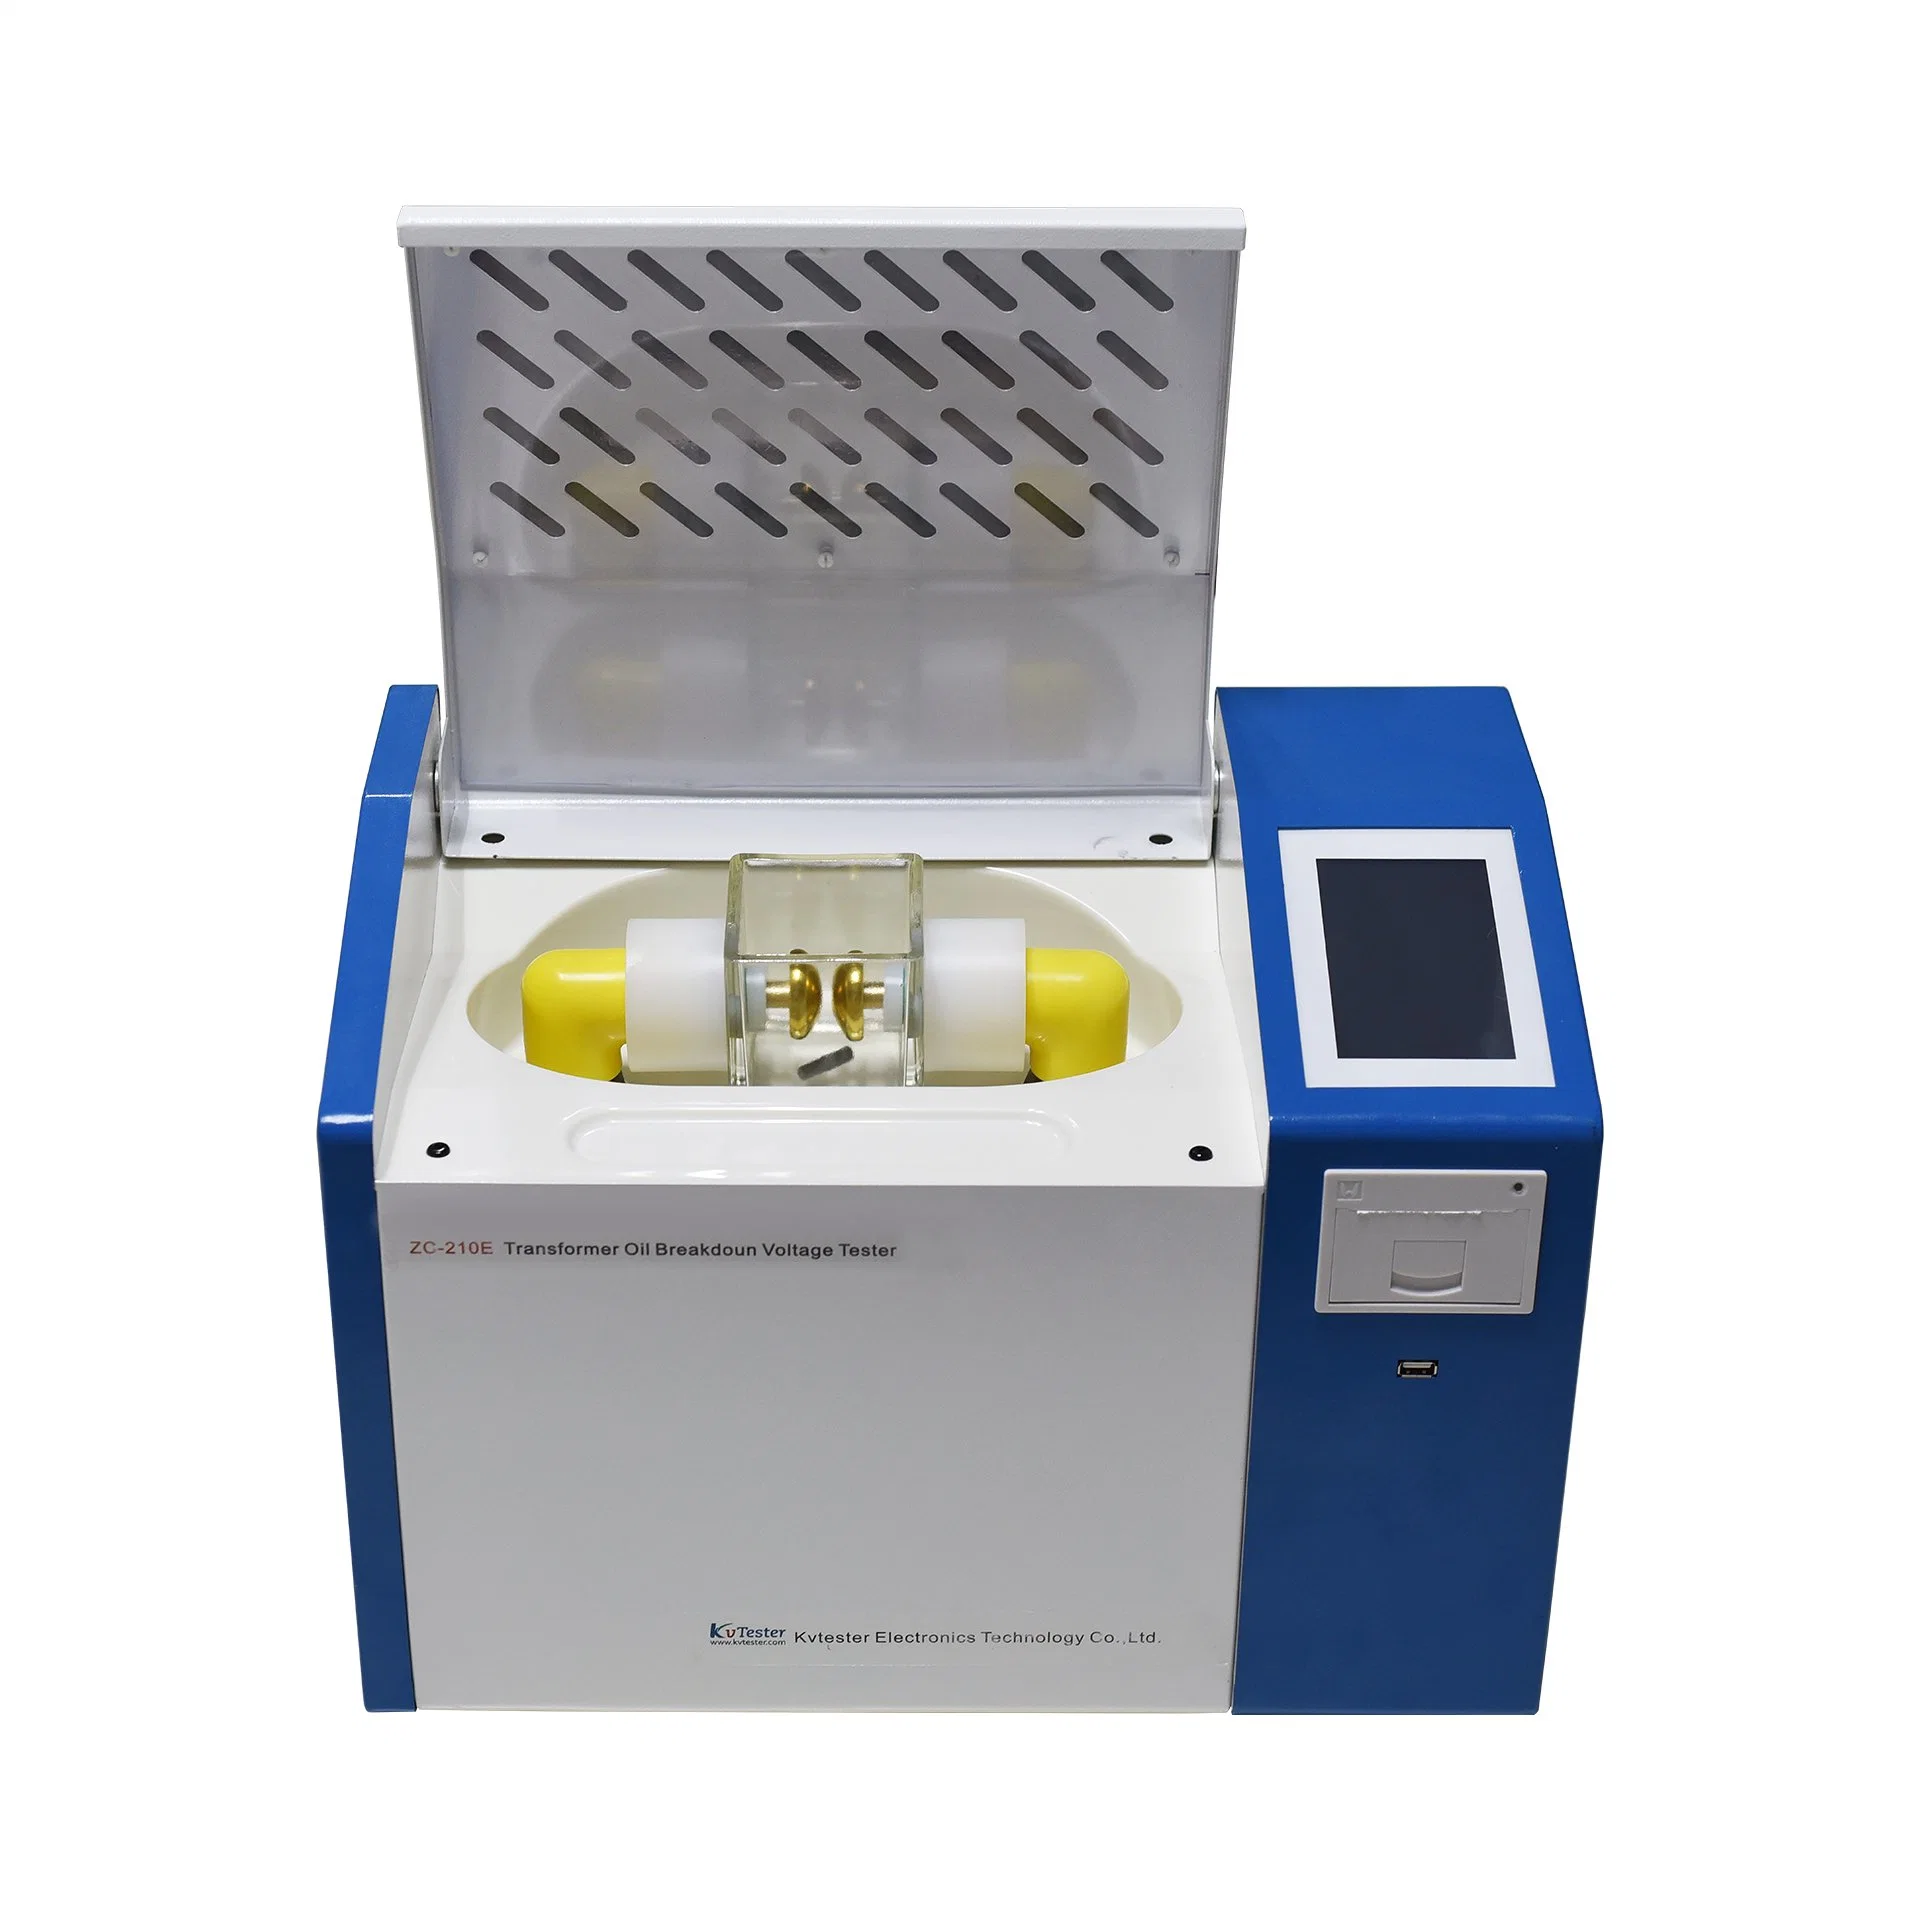 New Model of Transformer Oil Breakdown Withstand Voltage Tester for Oil Circulation